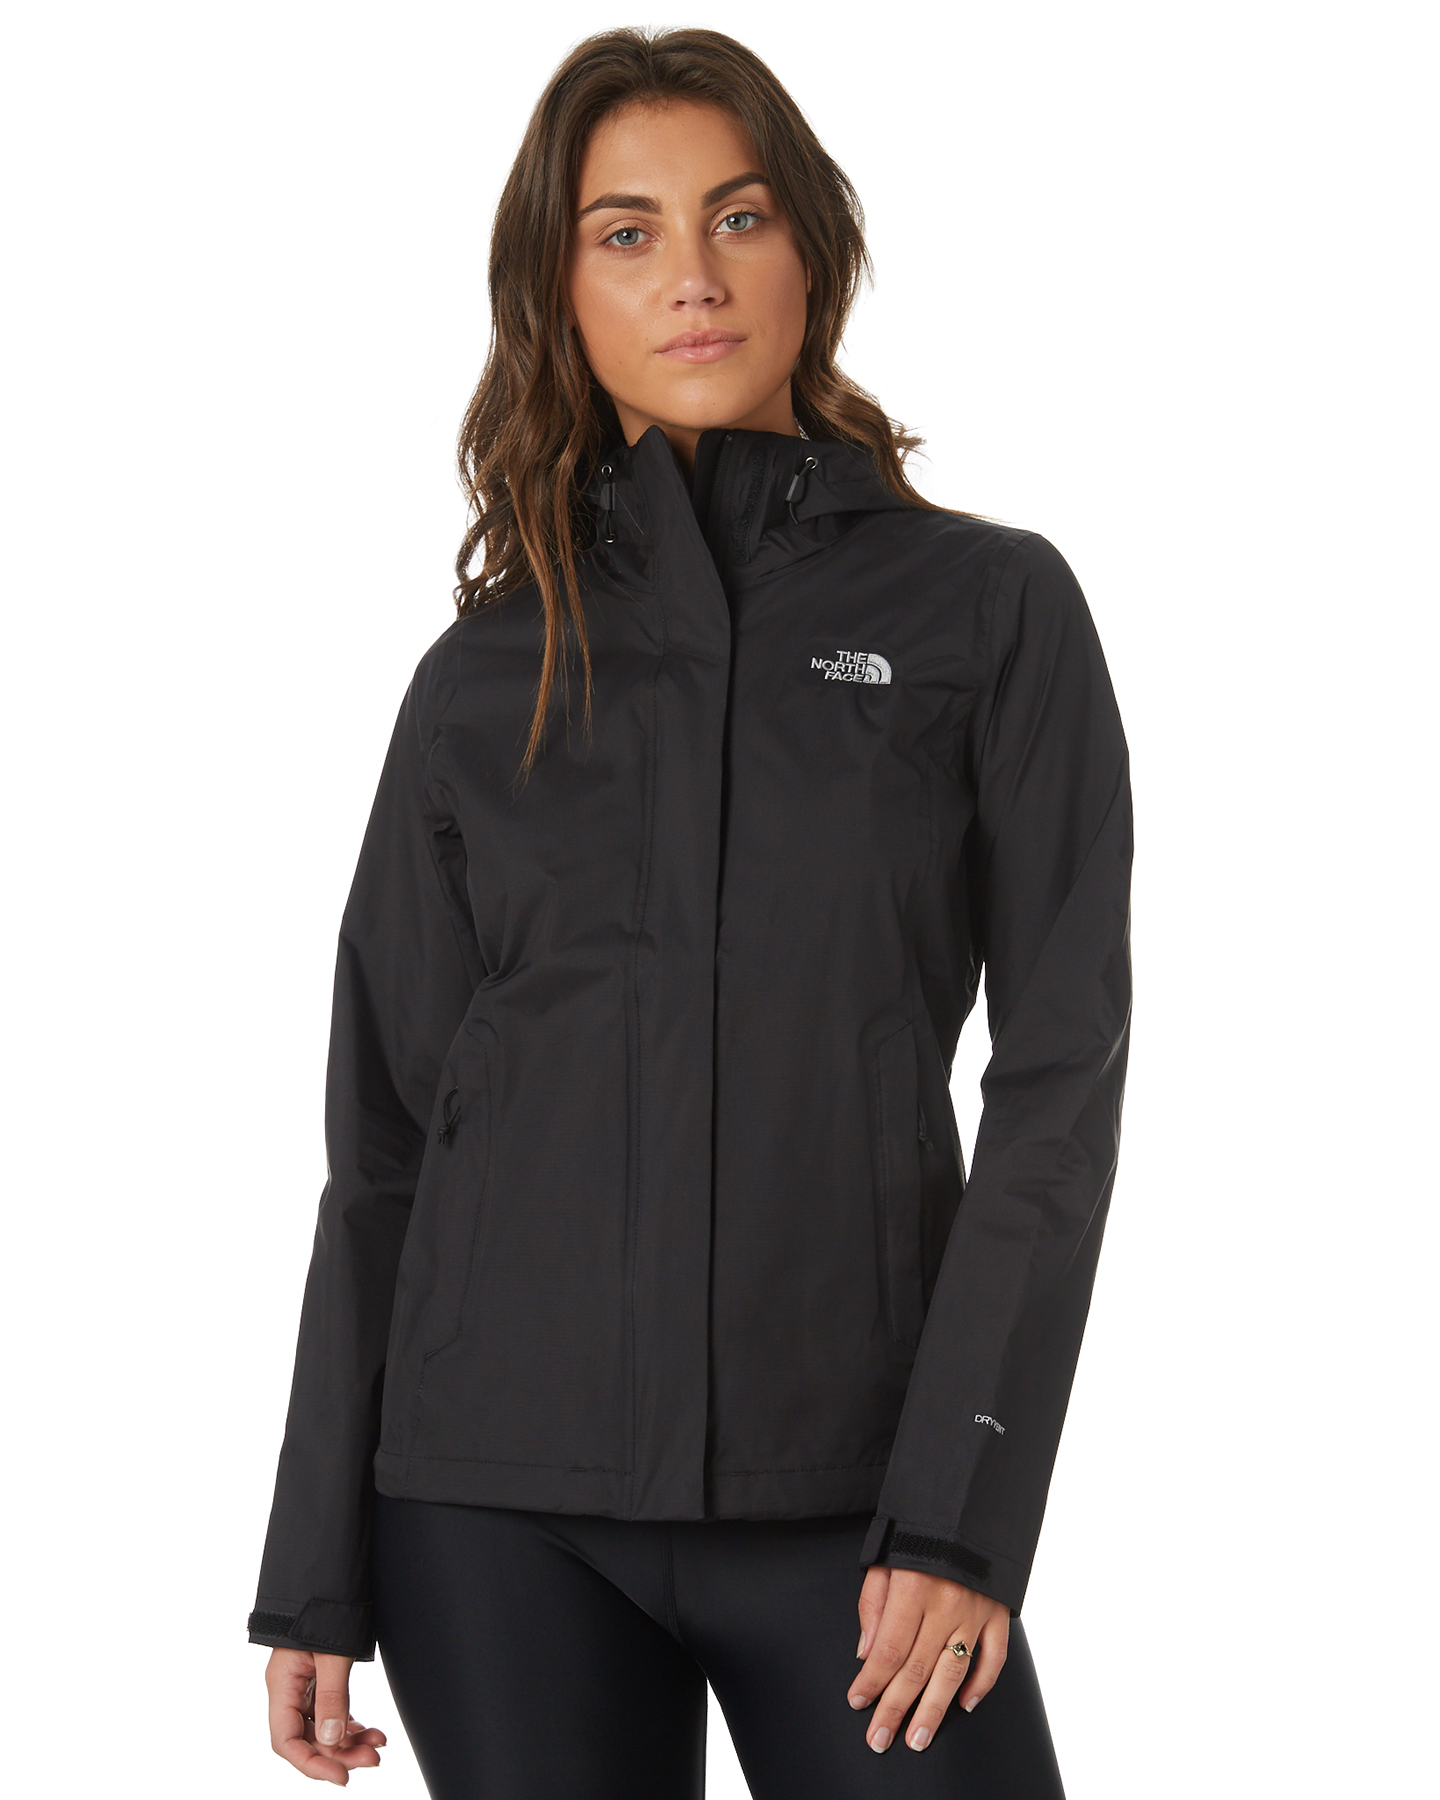 The North Face Venture 2 Womens Jacket - Tnf Black | SurfStitch